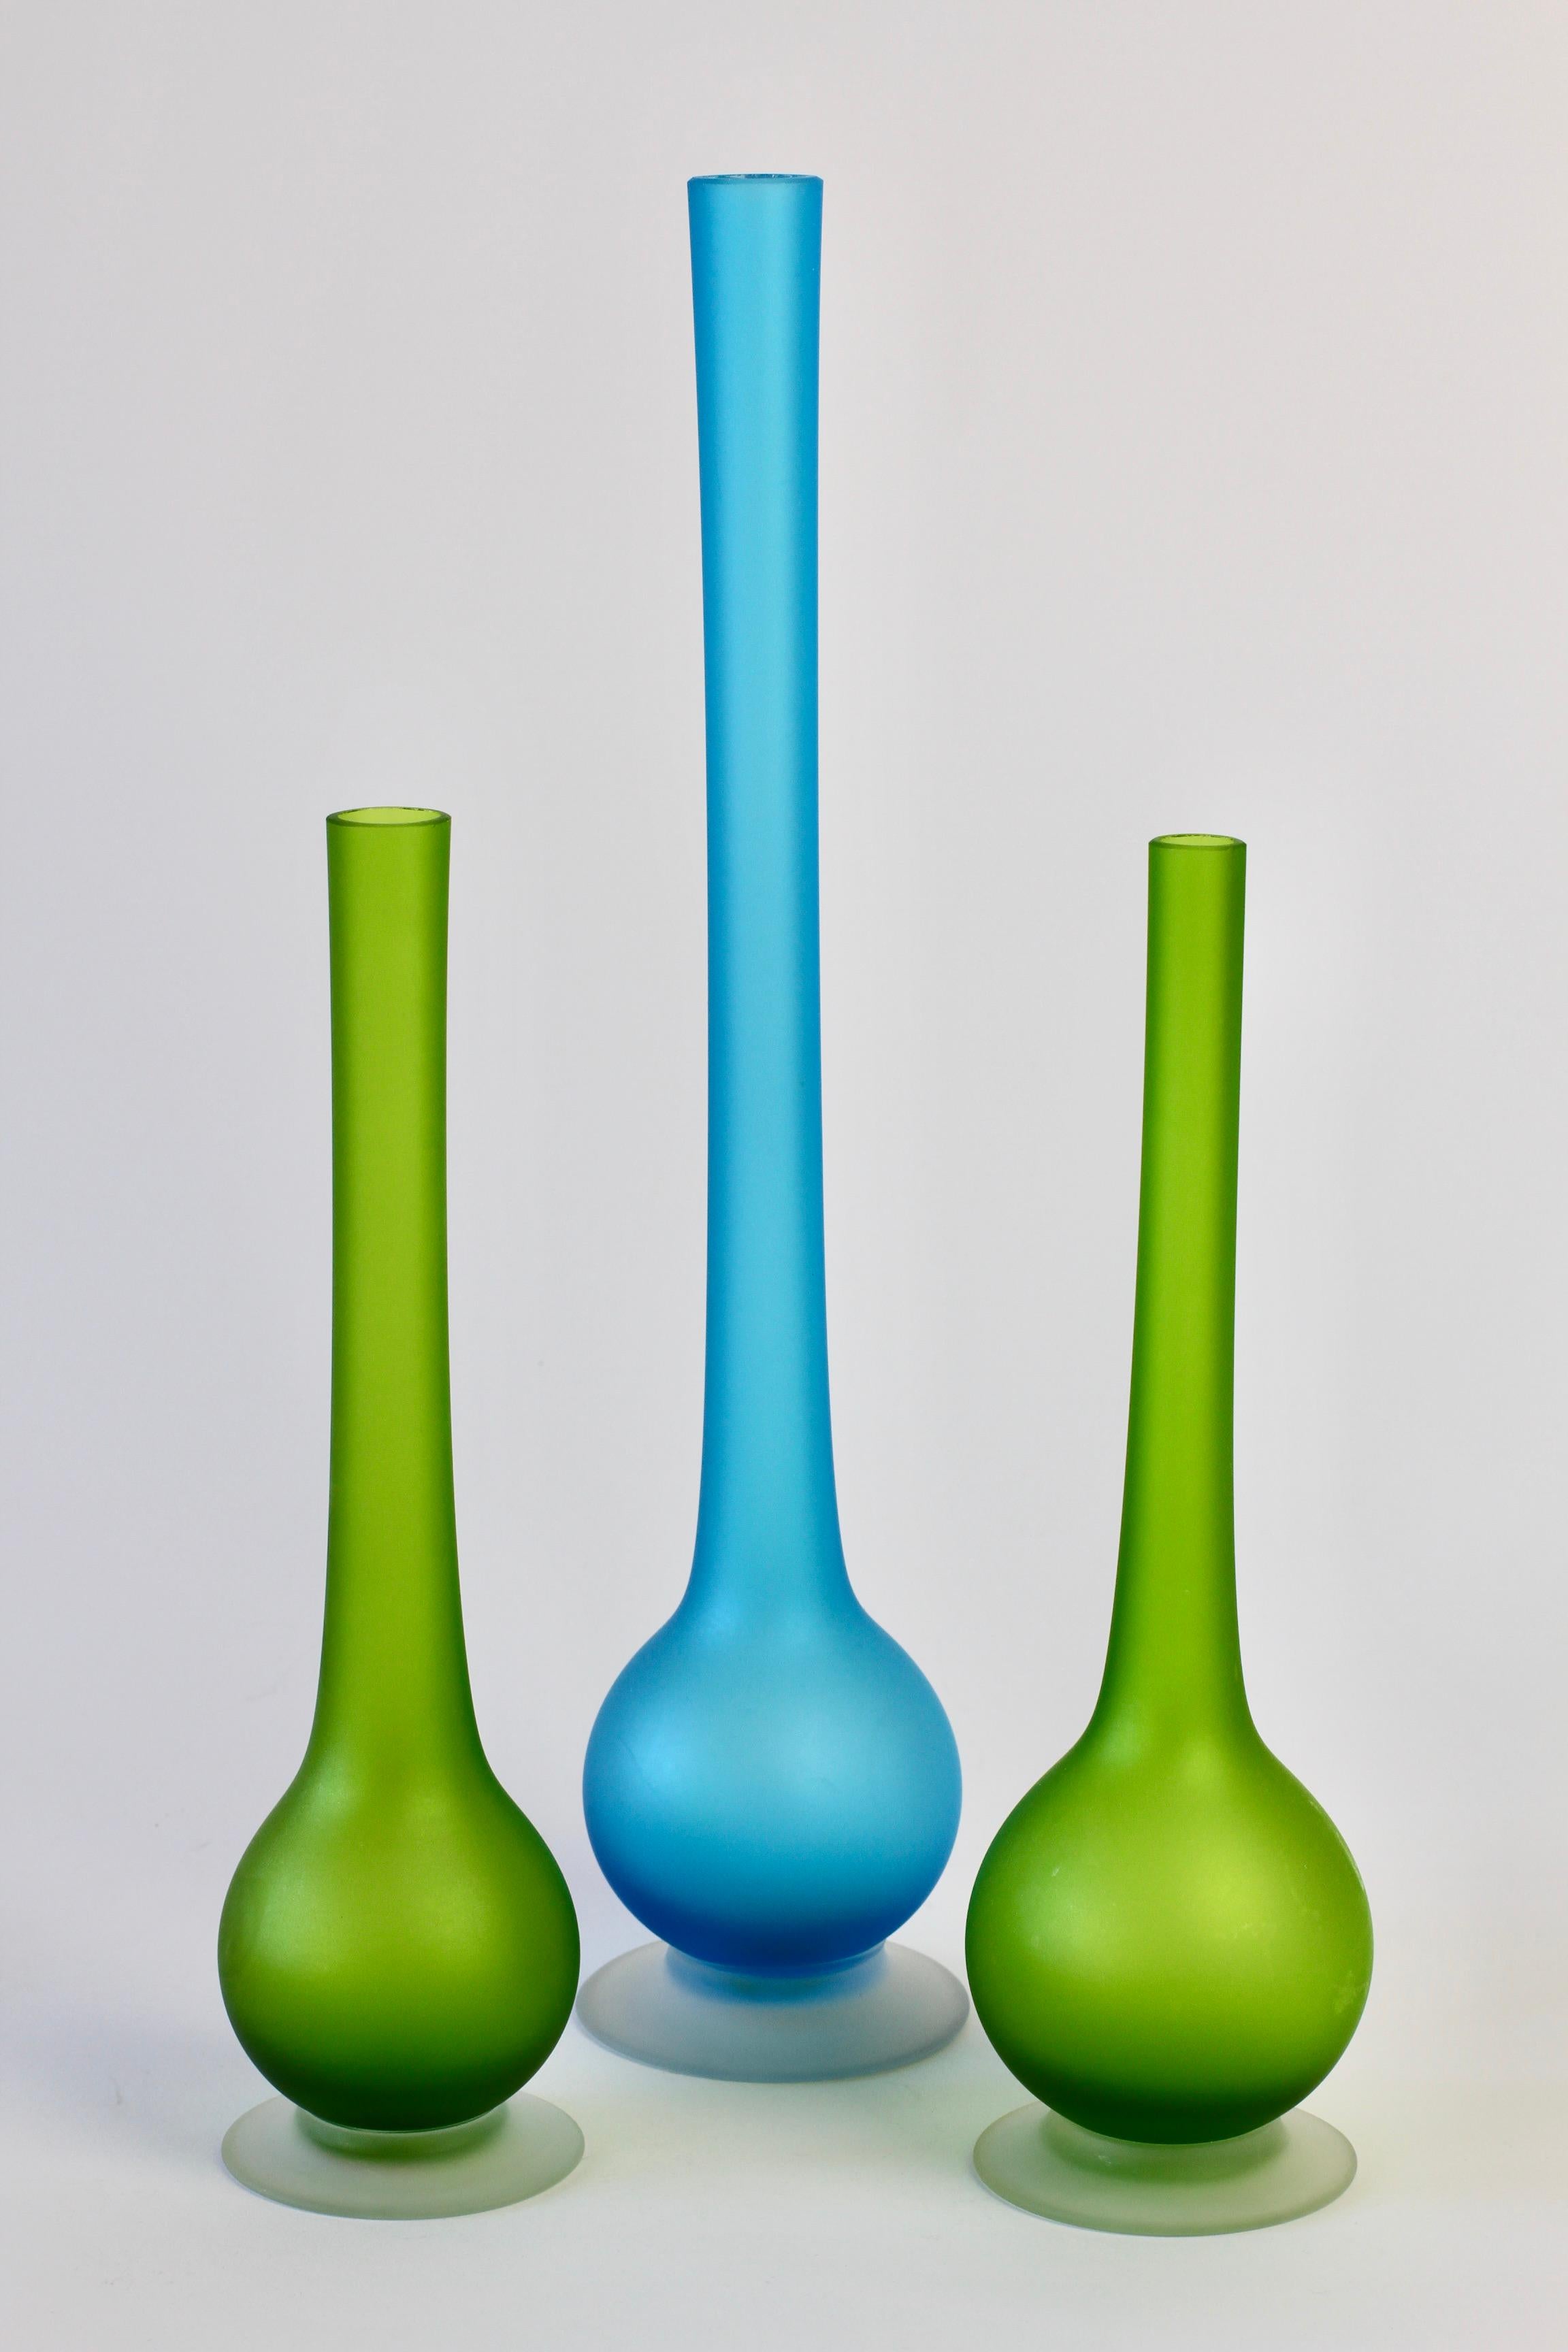 Stunning set of three Mid-Century Modern vibrant jellybean colored / colored satin Murano glass pencil neck vases by Carlo Moretti (1934-2008), circa 1970.

An absolutely bold yet elegant design with the use of bright, vivid blue and orange